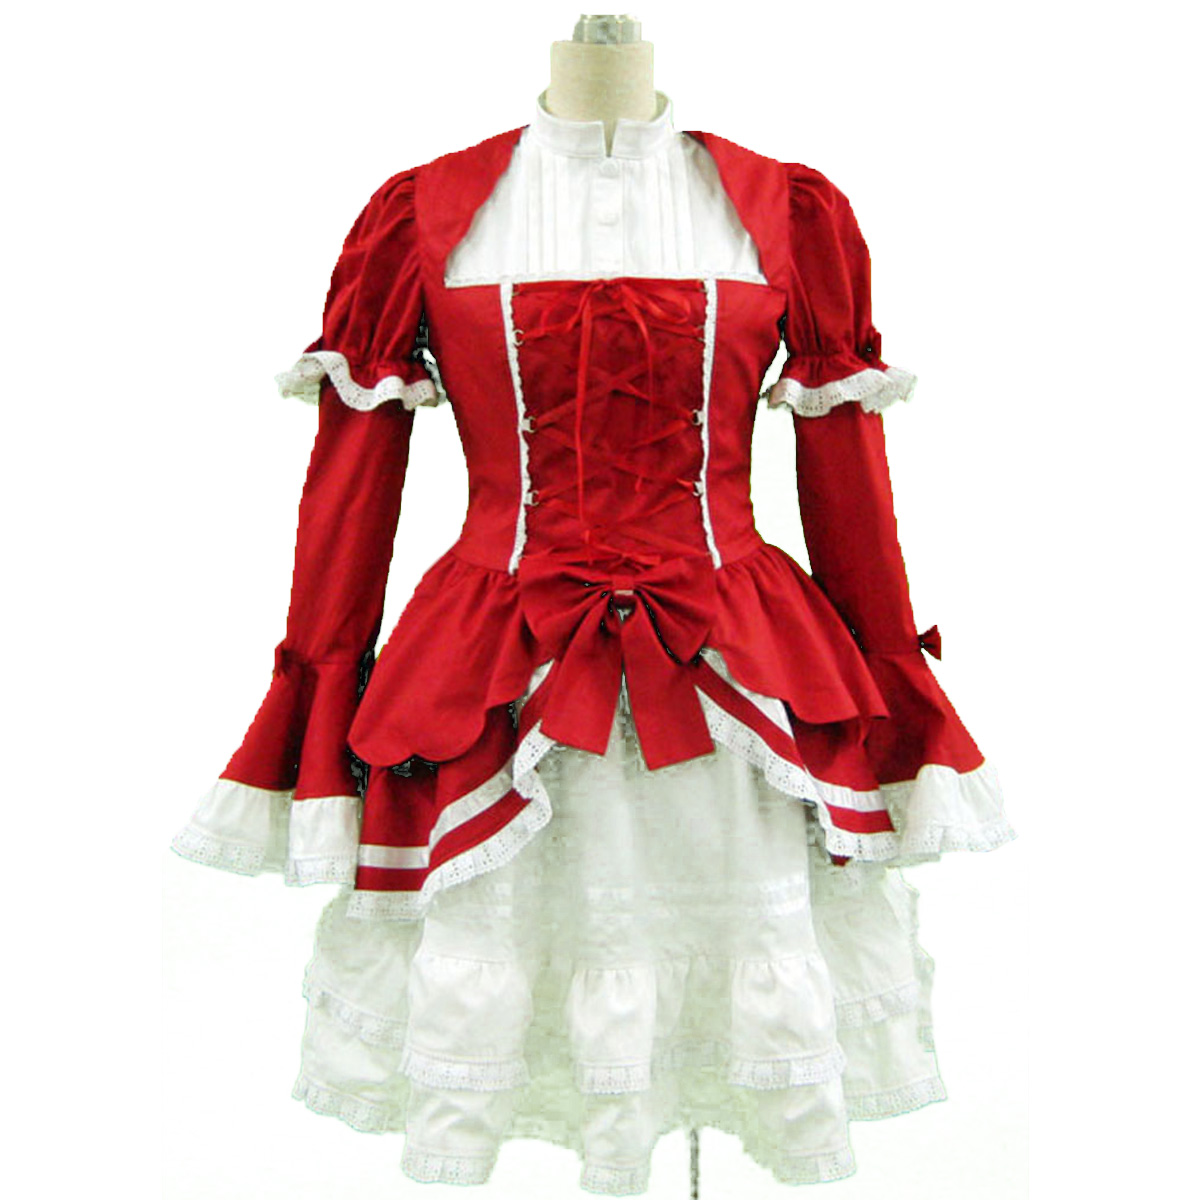 Deluxe Lolita Culture Red and White Sleeveless Short Dresses 3RD Cosplay